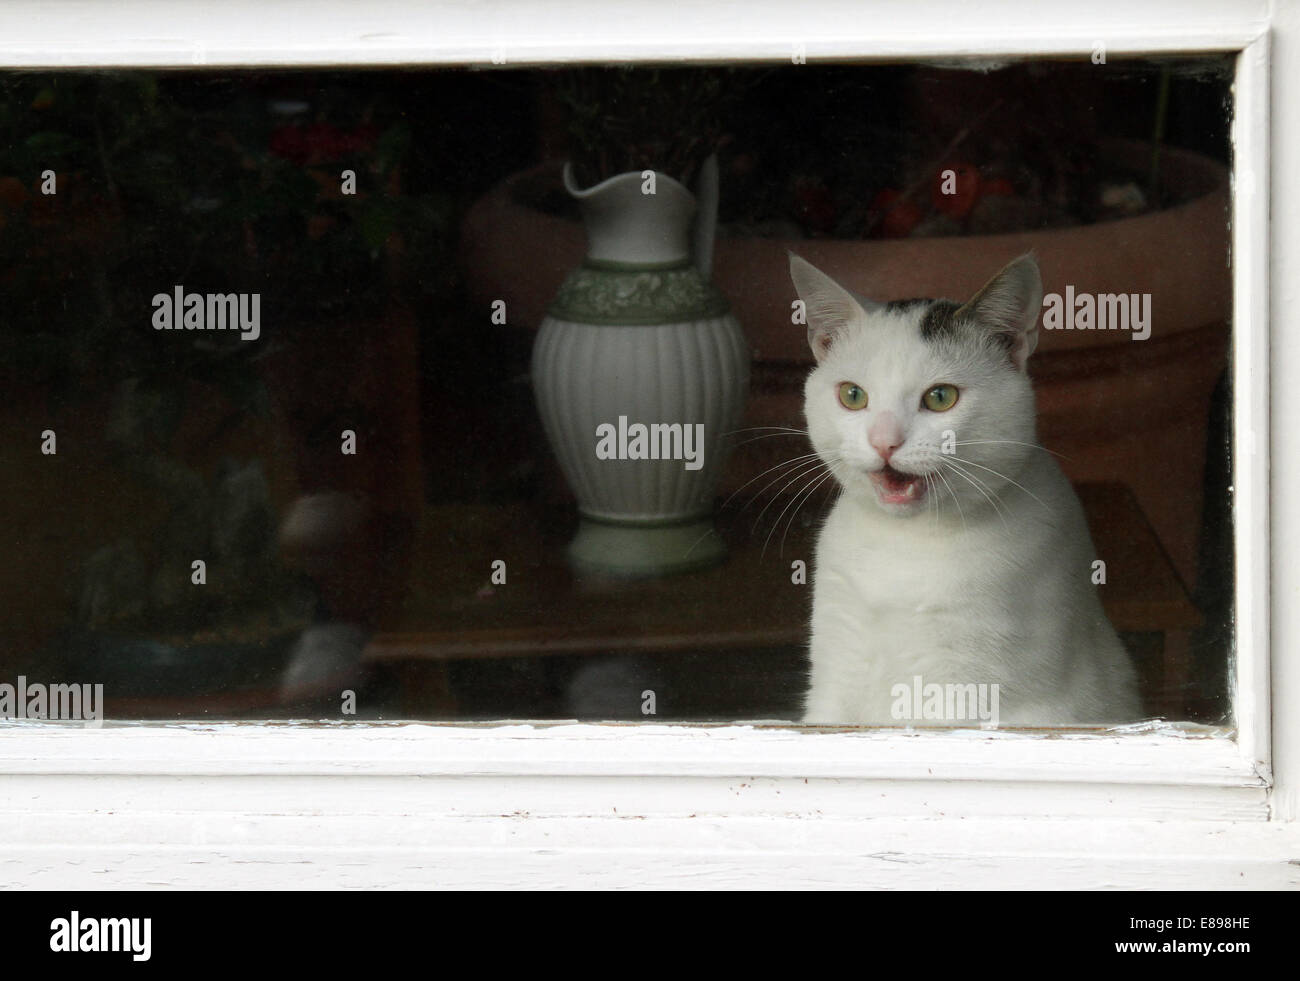 New Hagen, Germany, meowing cat looking out a window Stock Photo